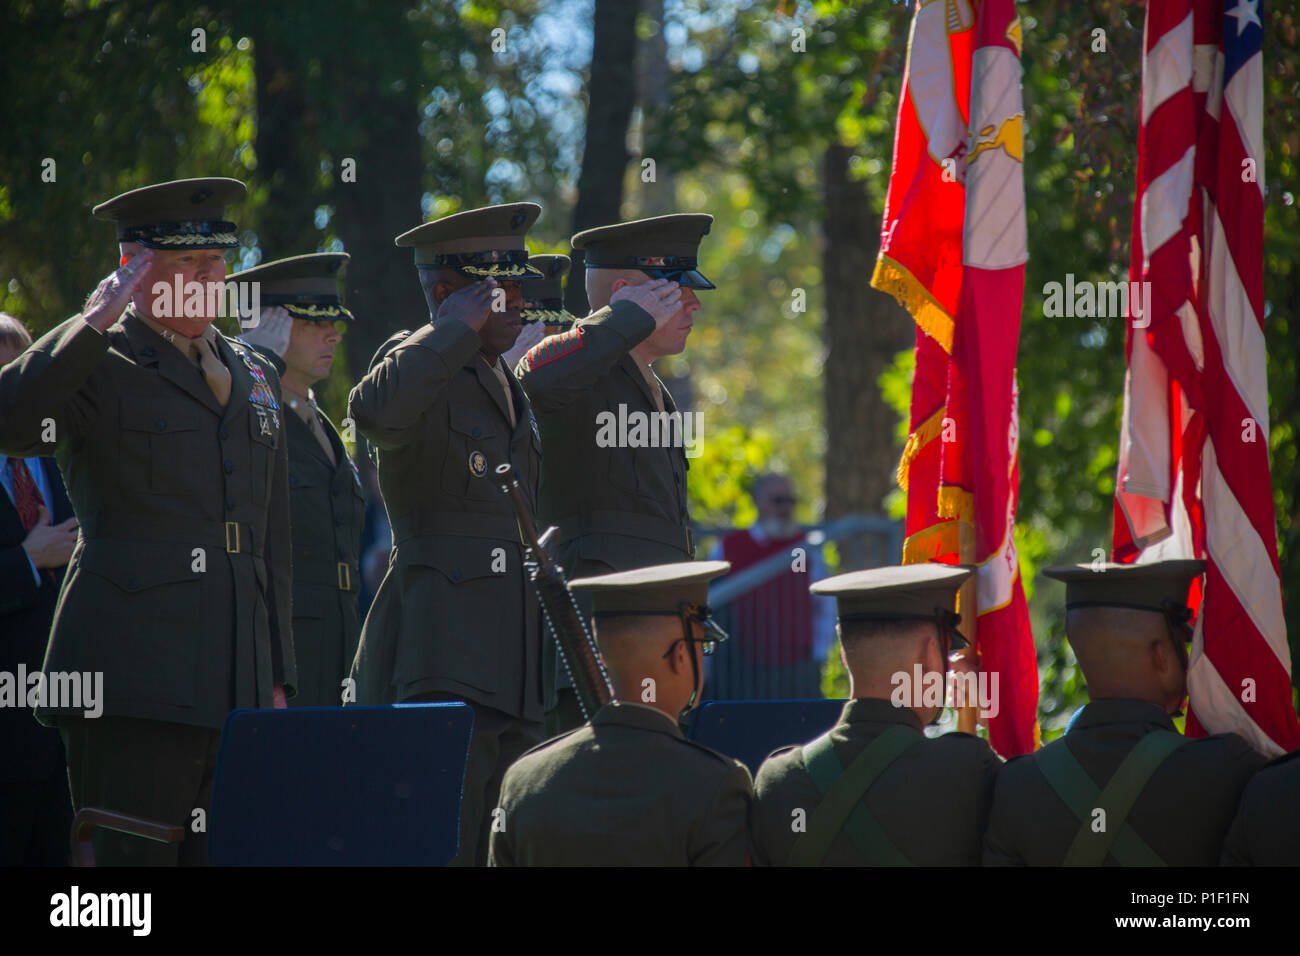 U.S. Marine Corps Maj. Gen. Walter L. Miller Jr., commanding general, left, II Marine Expeditionary Force, salutes the colors as they are retired during the 33rd Beirut Memorial Observance Ceremony, Lejeune Memorial Gardens, Jacksonville, N.C., Oct. 23, 2016. A memorial observance is held October 23rd of each year to remember those lives lost during the terrorist attack at U.S. Marine Barracks, Beirut, Lebanon, in 1983. (U.S. Marine Corps photo by Lance Cpl. Austin M. Livingston) Stock Photo